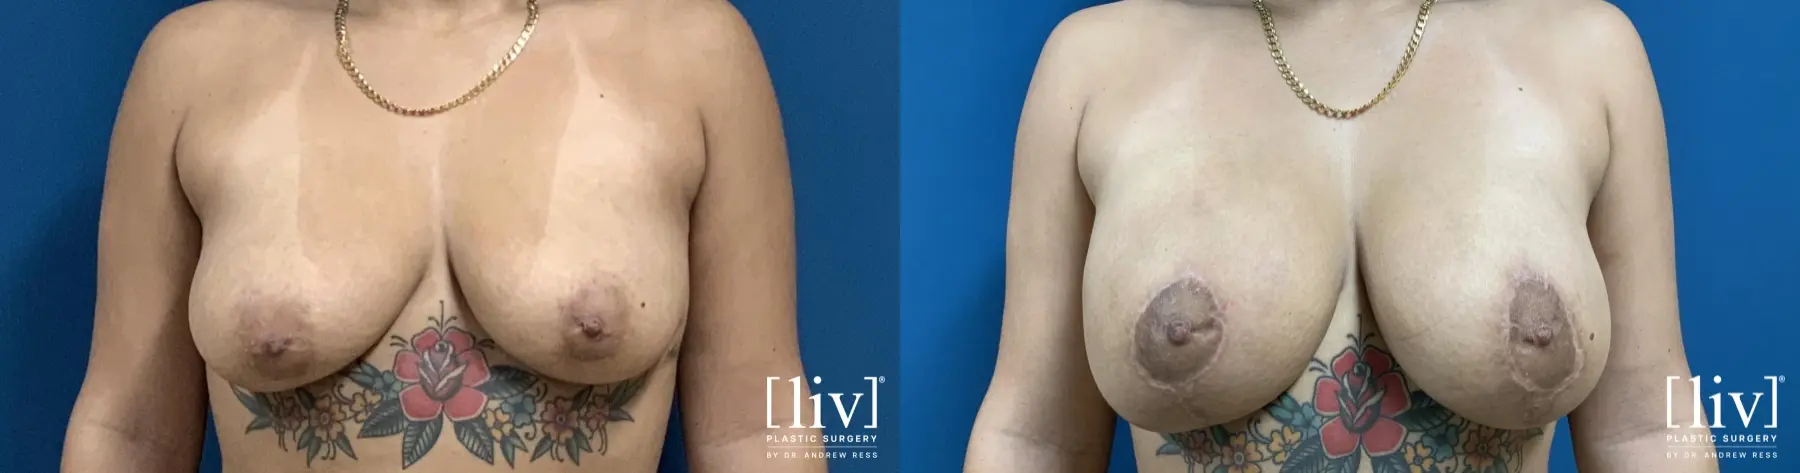 Breast Lift And Augmentation: Patient 2 - Before and After 1